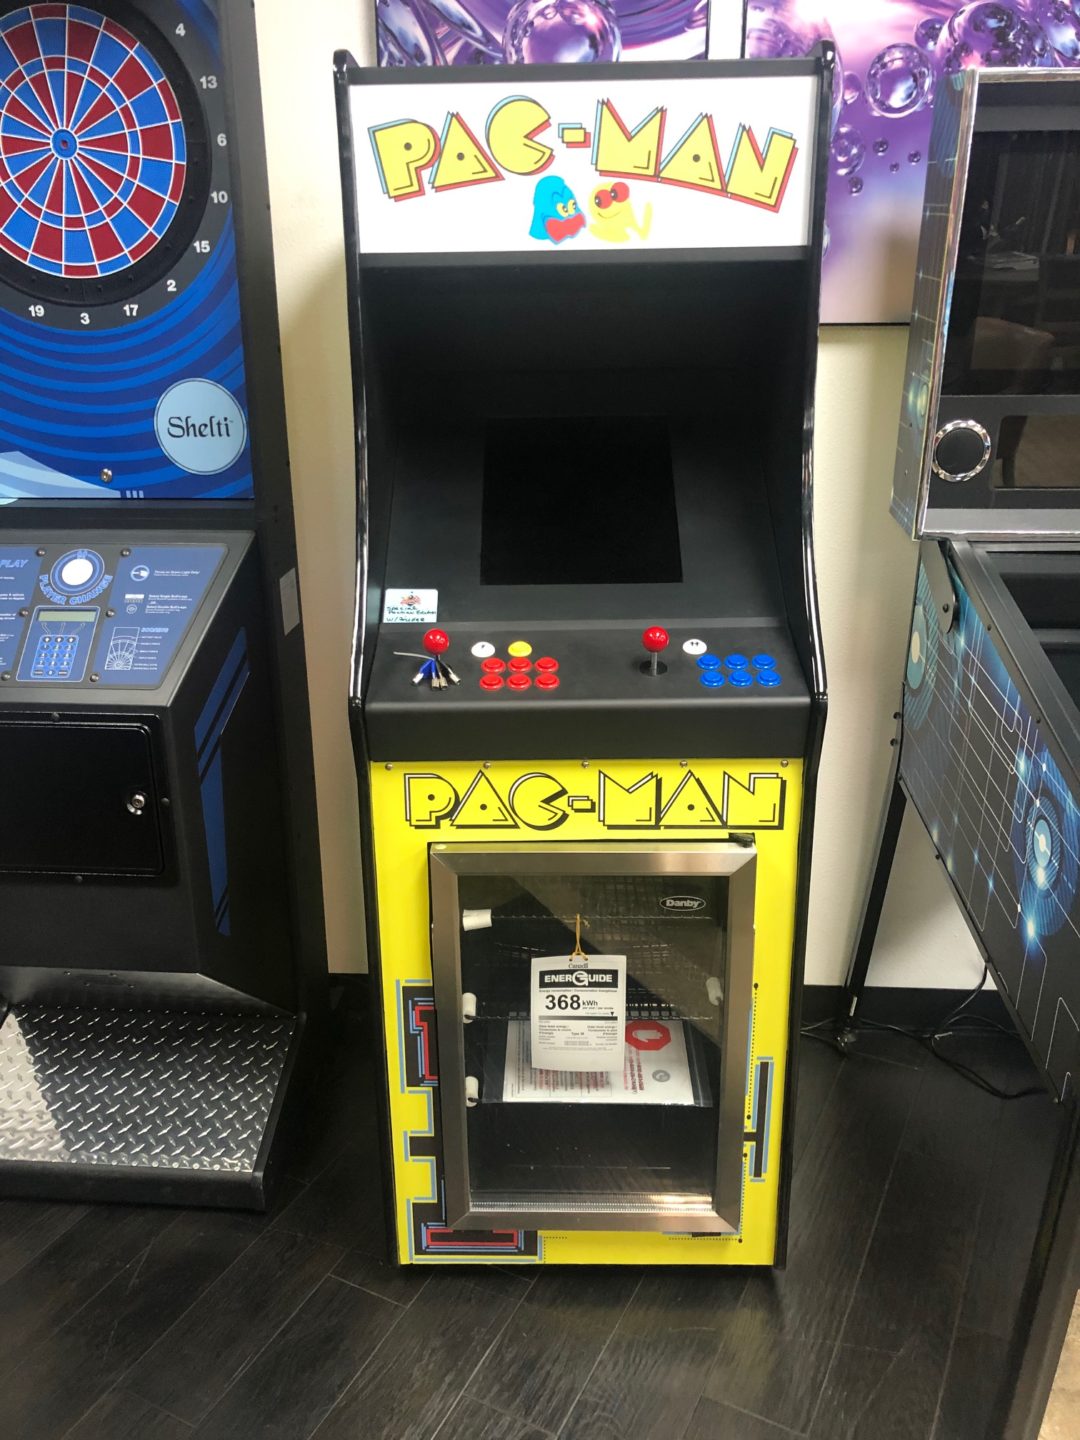 Pacman Arcade Multi Game With Built in Fridge! Plays 60 to 400 Games